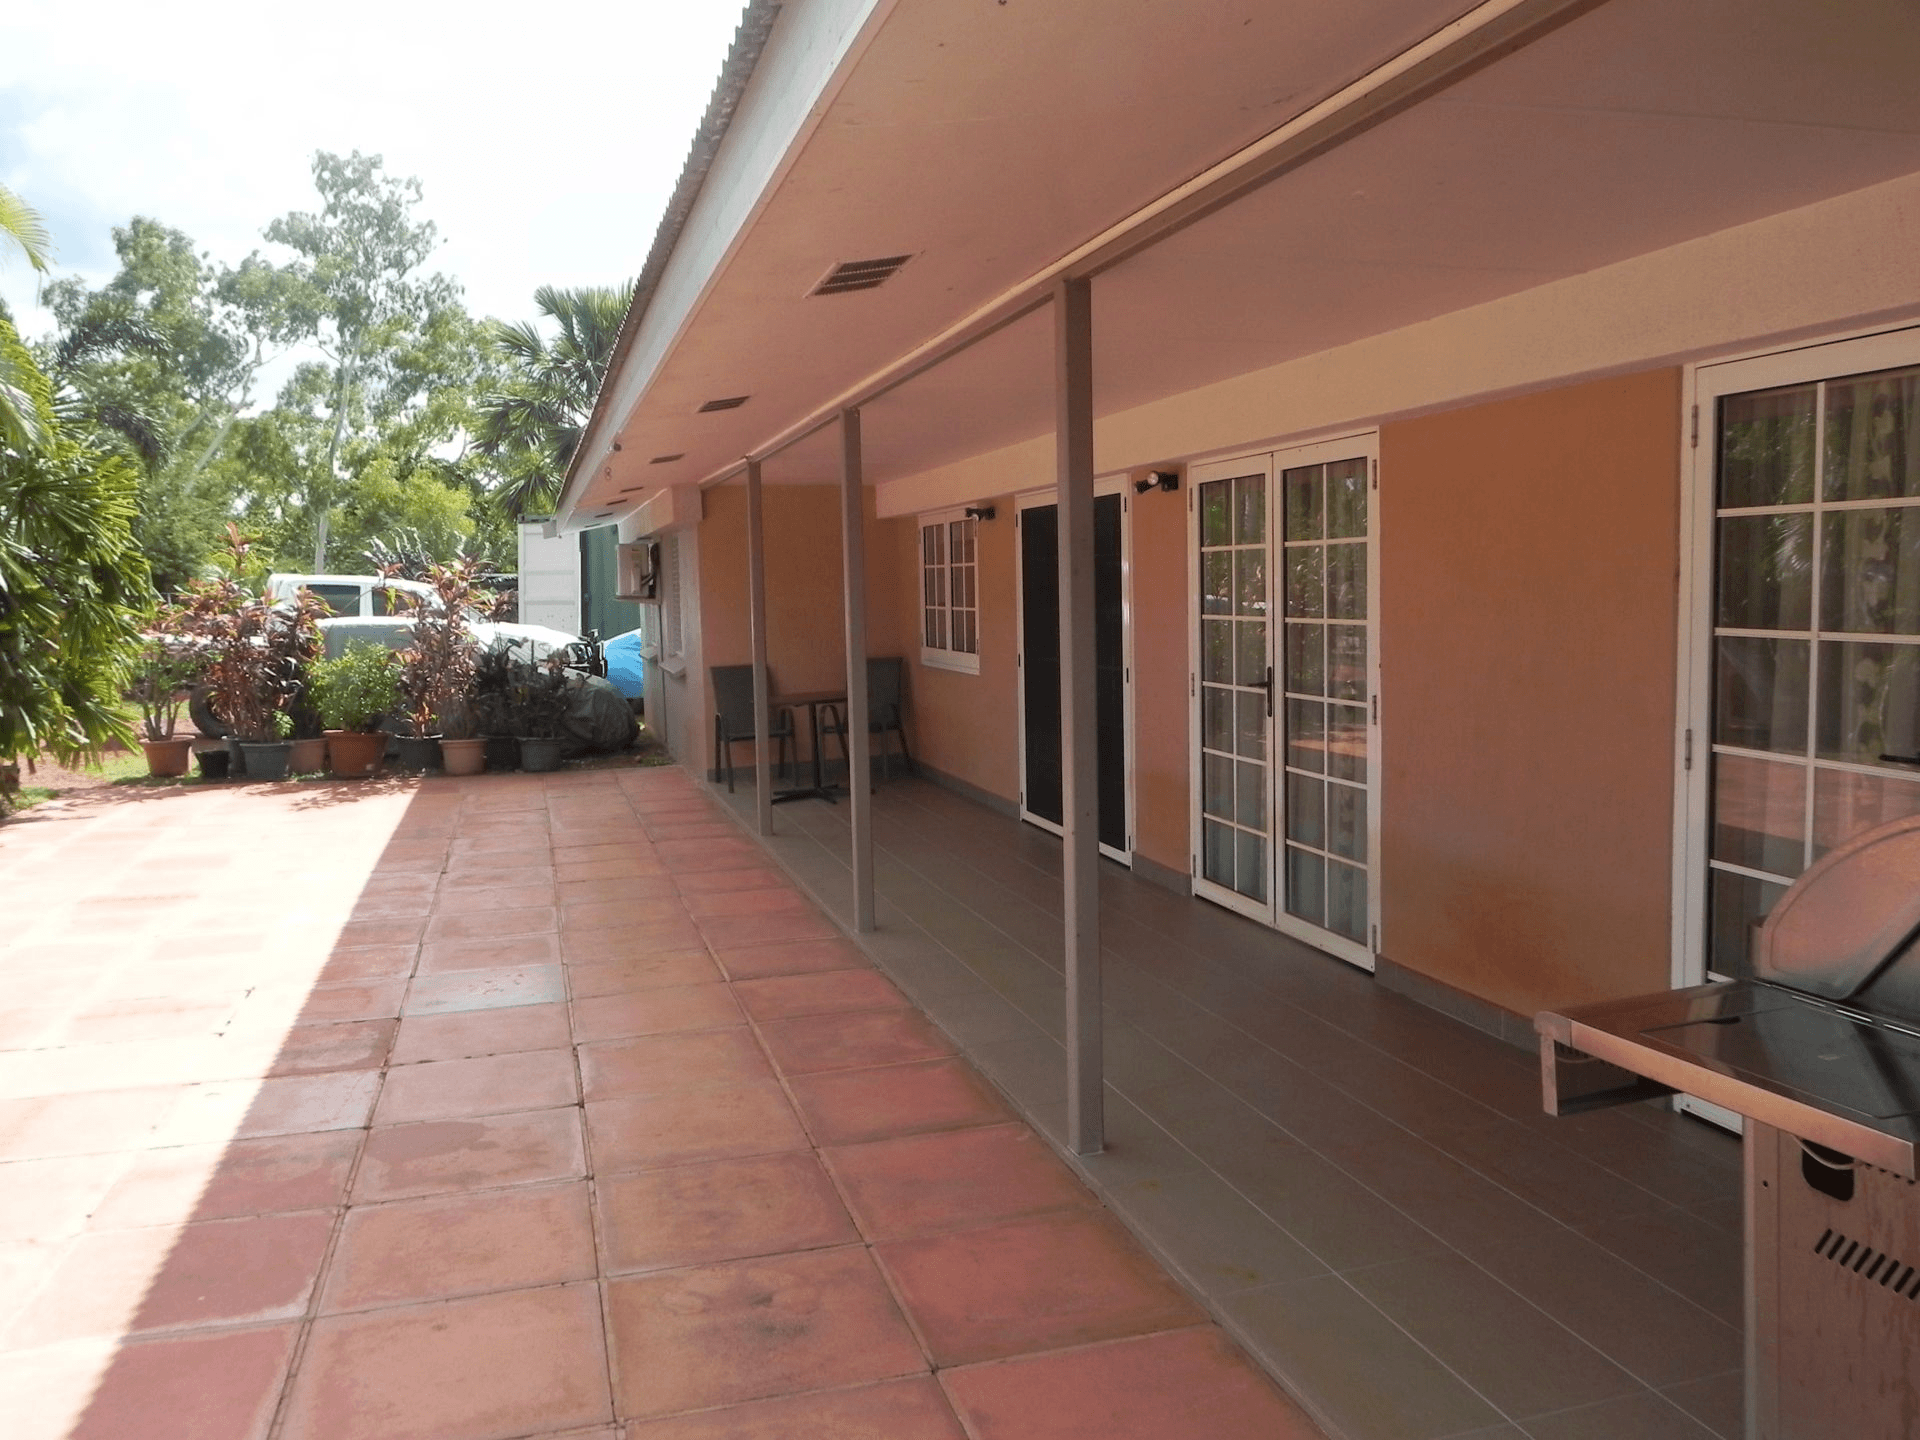 50 Parer Drive, Wagaman, NT 0810